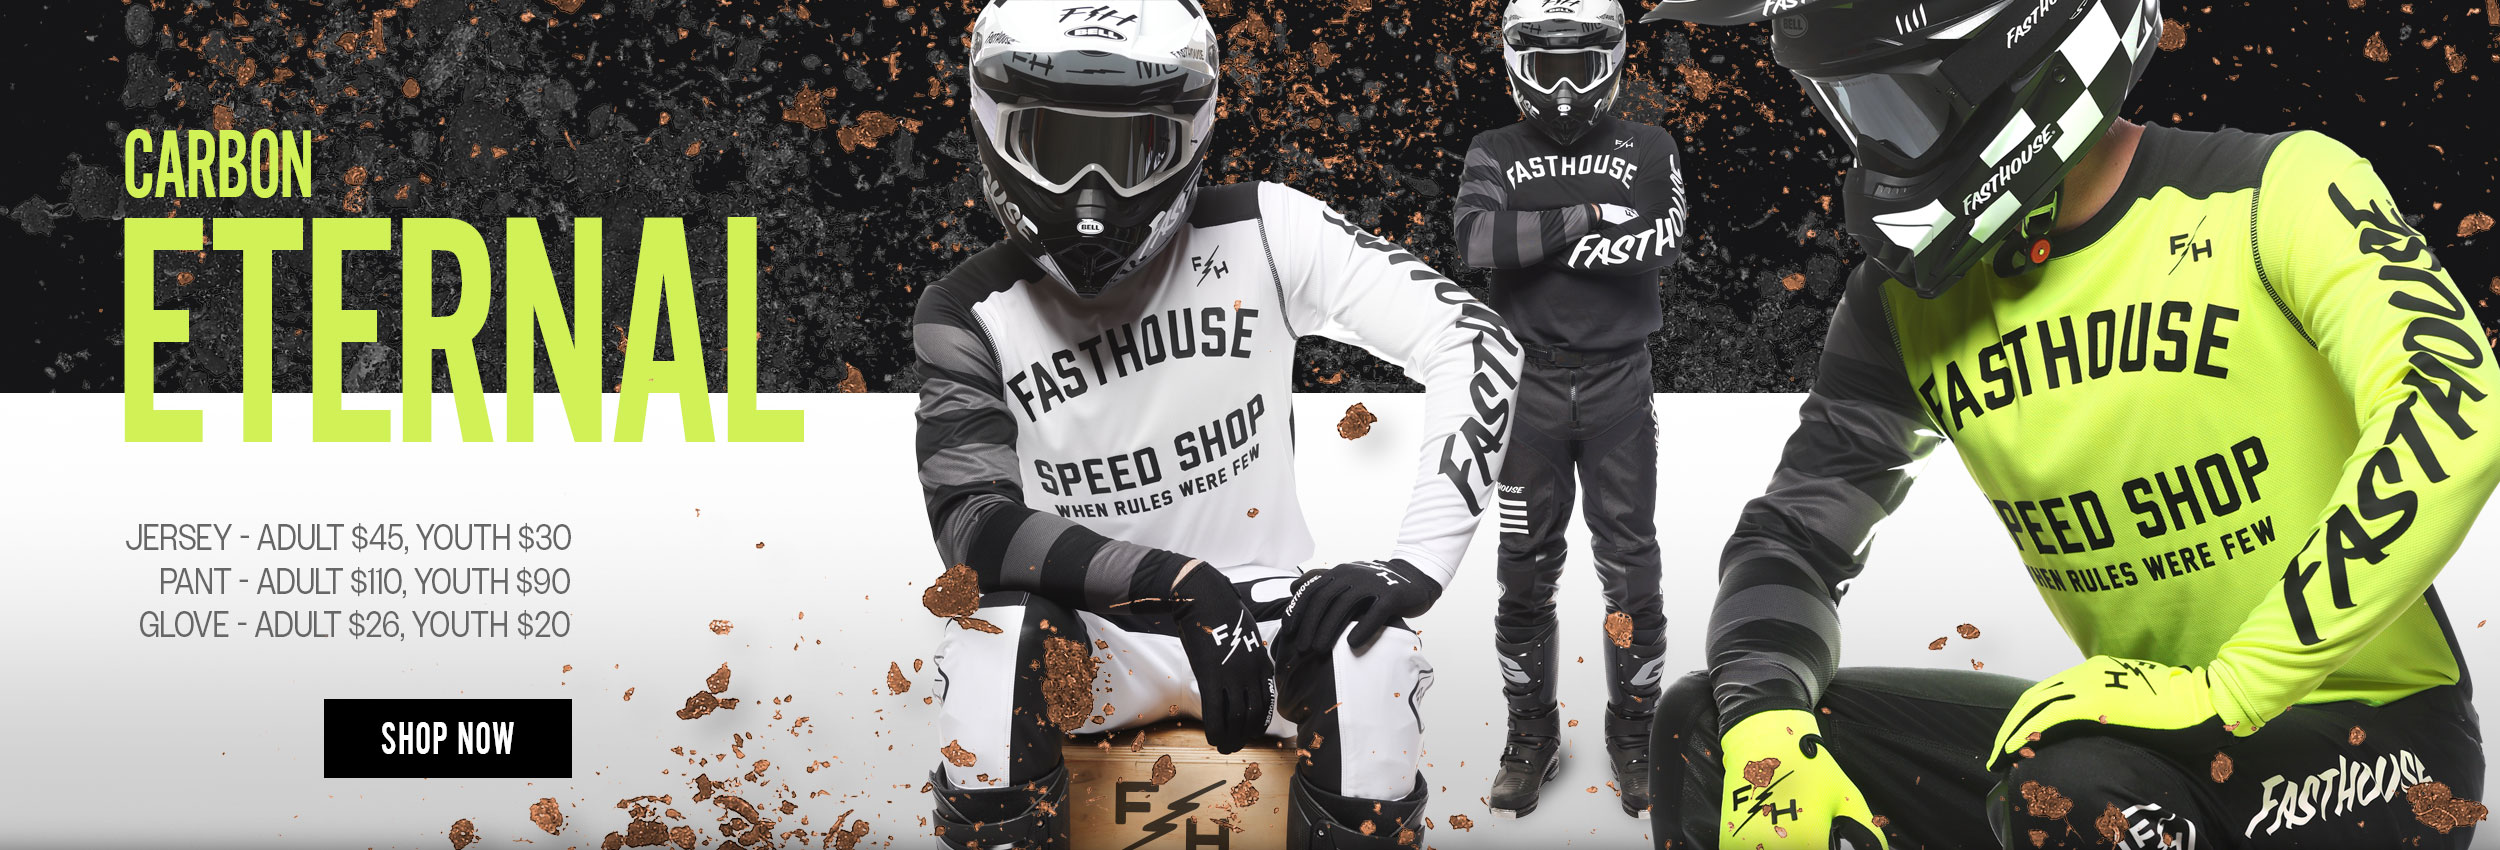 Fasthouse Carbon Eternal Jersey Pant and Glove